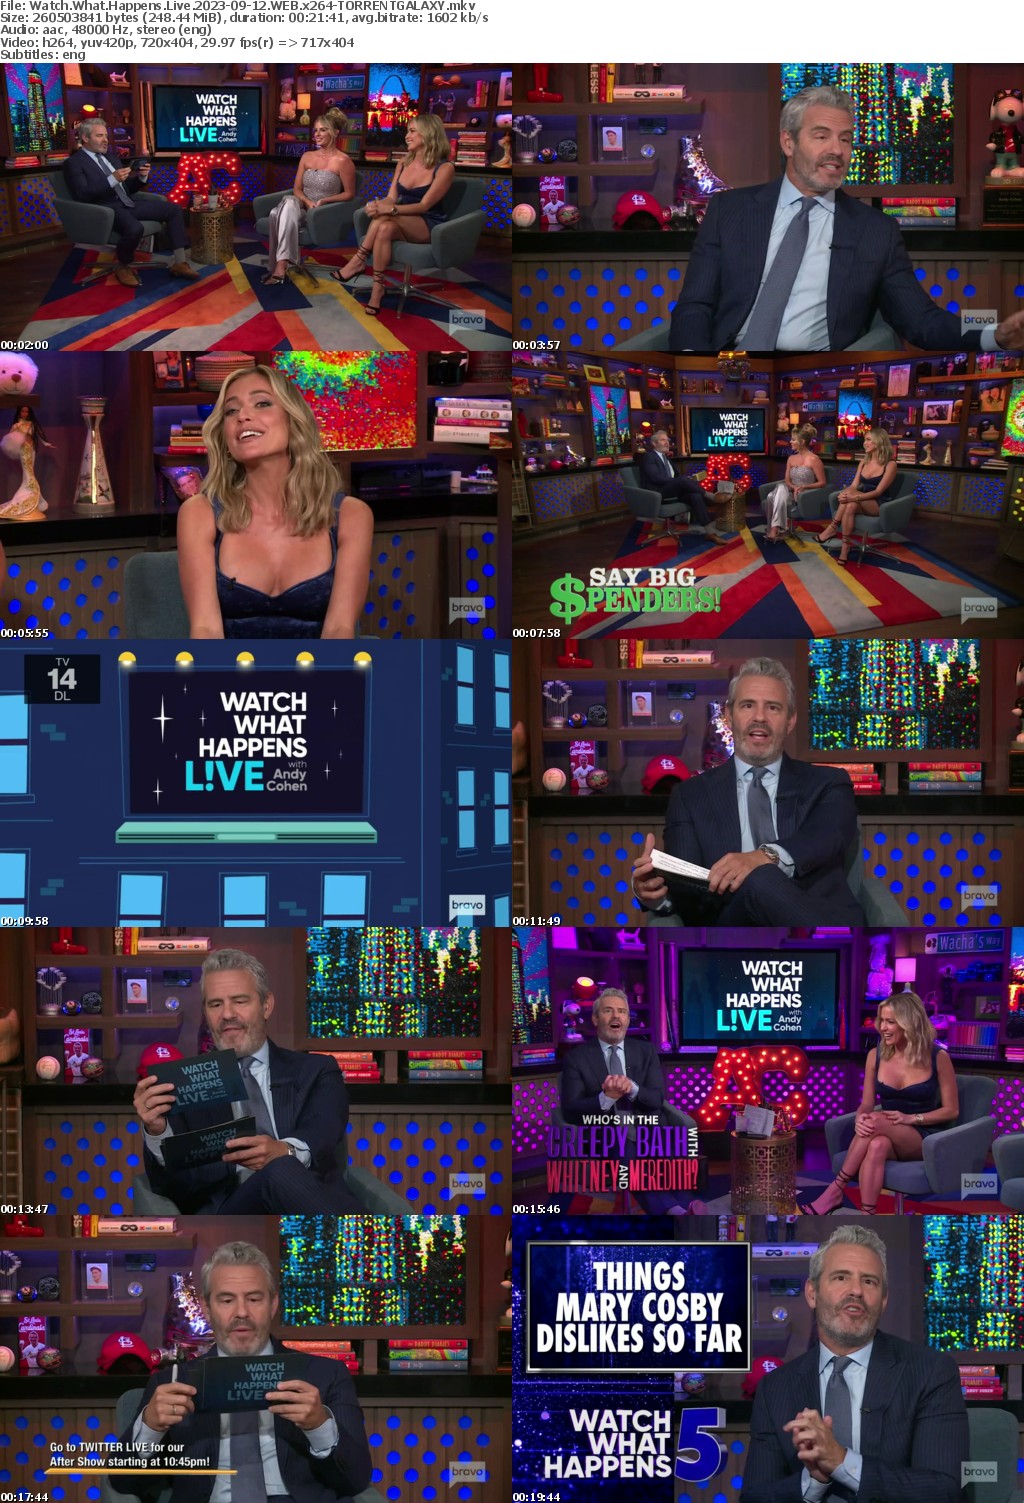 Watch What Happens Live 2023-09-12 WEB x264-GALAXY